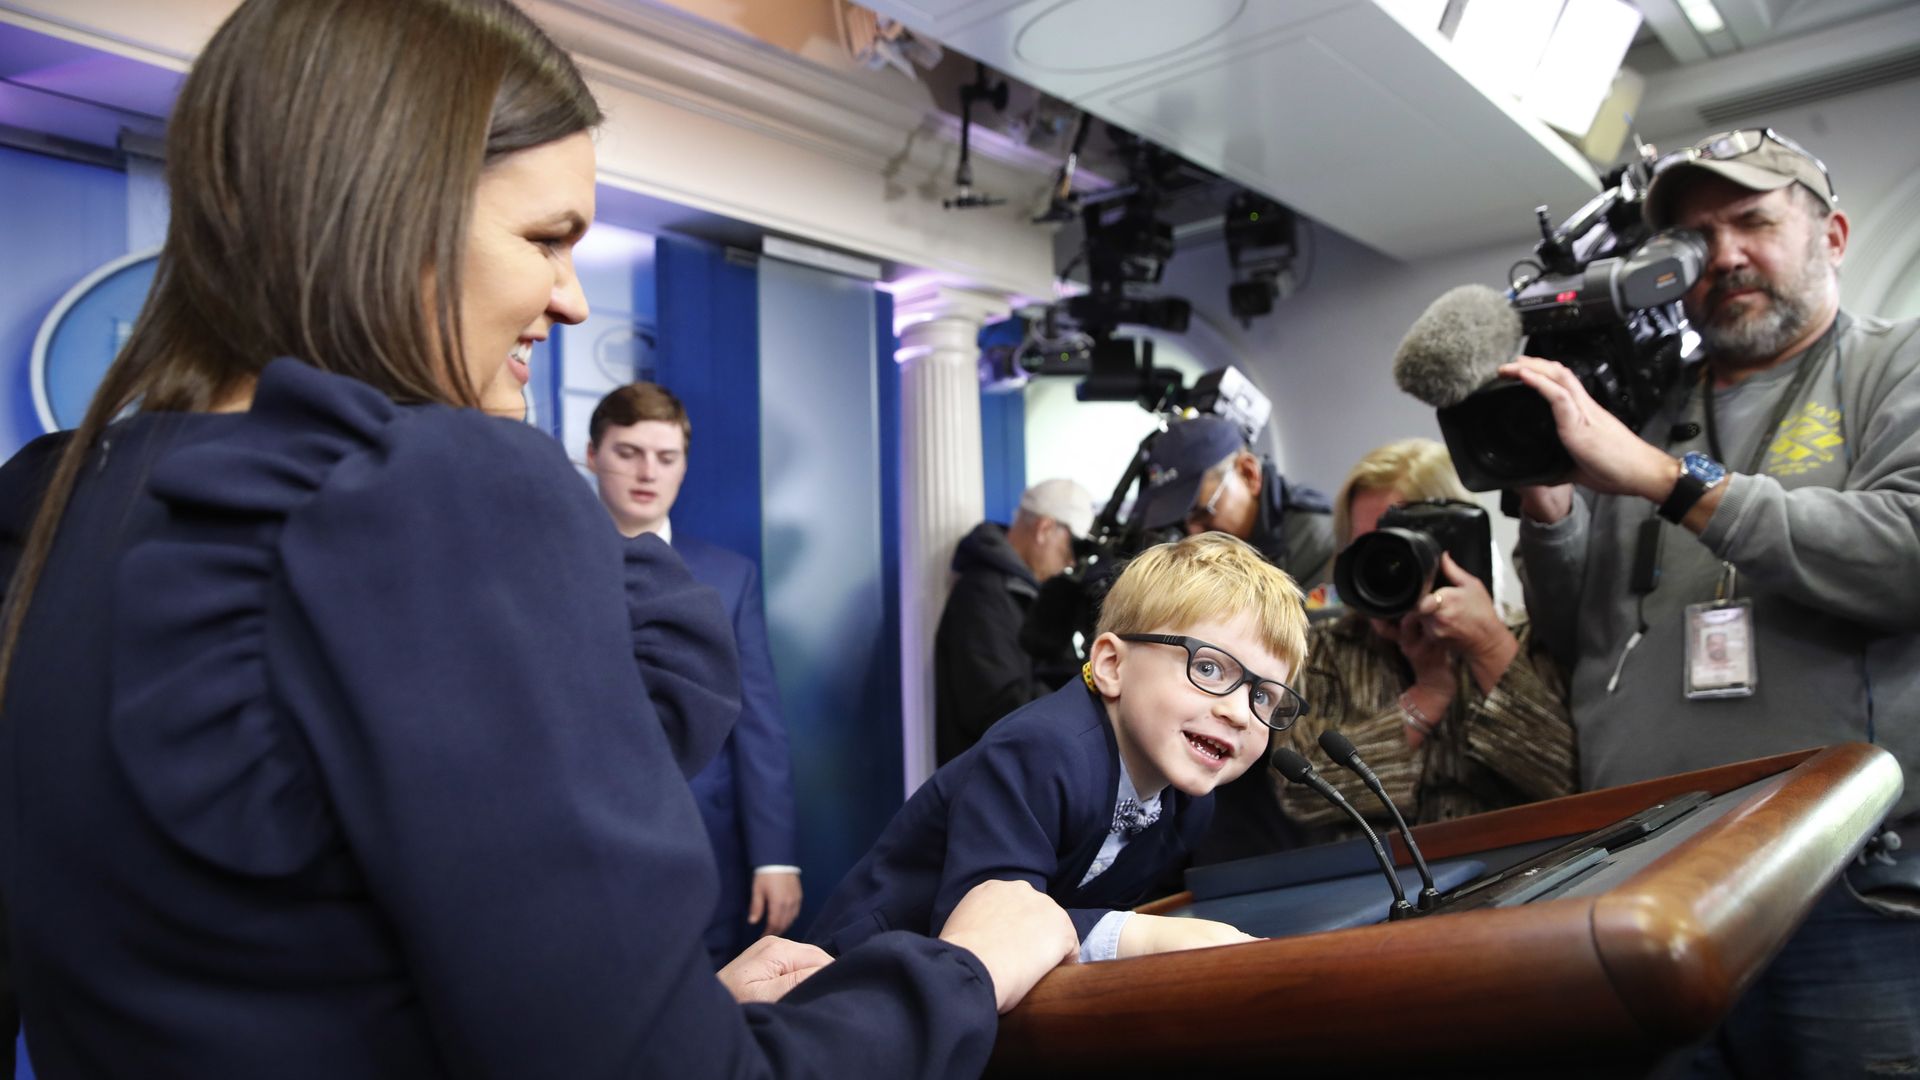 Sanders' son Huck, 4, climbed the podium during a press preview of the Thanksgiving turkey pardoning.